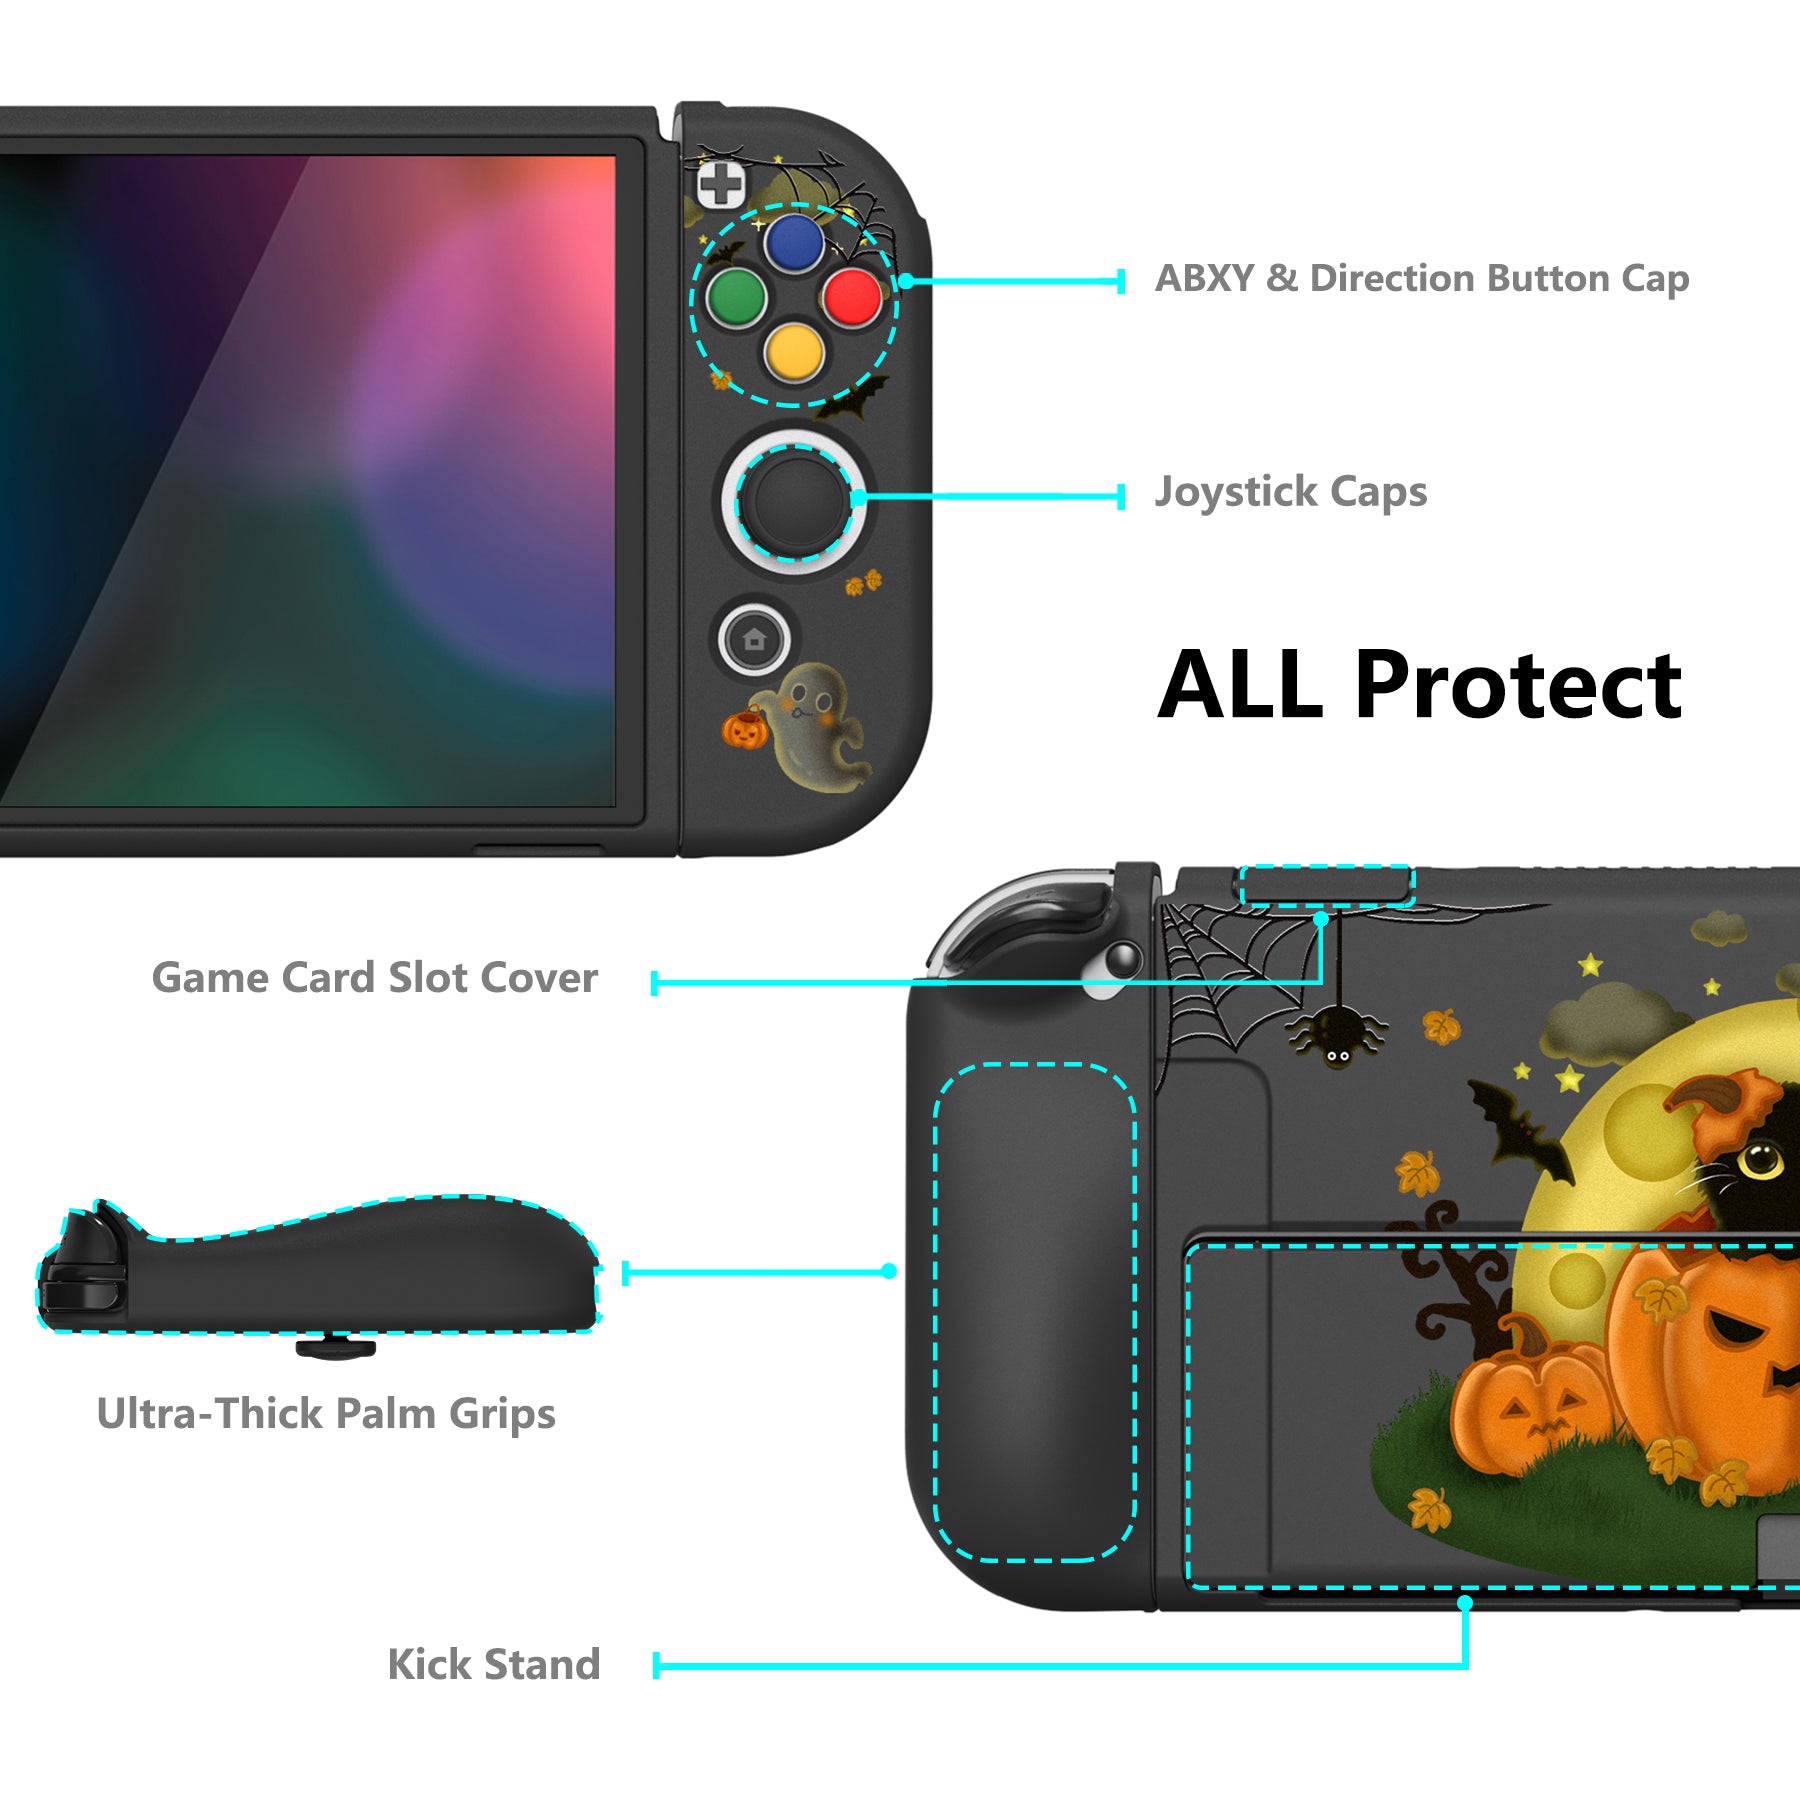 PlayVital ZealProtect Soft Protective Case for Switch OLED, Flexible Protector Joycon Grip Cover for Switch OLED with Thumb Grip Caps & ABXY Direction Button Caps - Moon Night Halloween - XSOYV6022 playvital